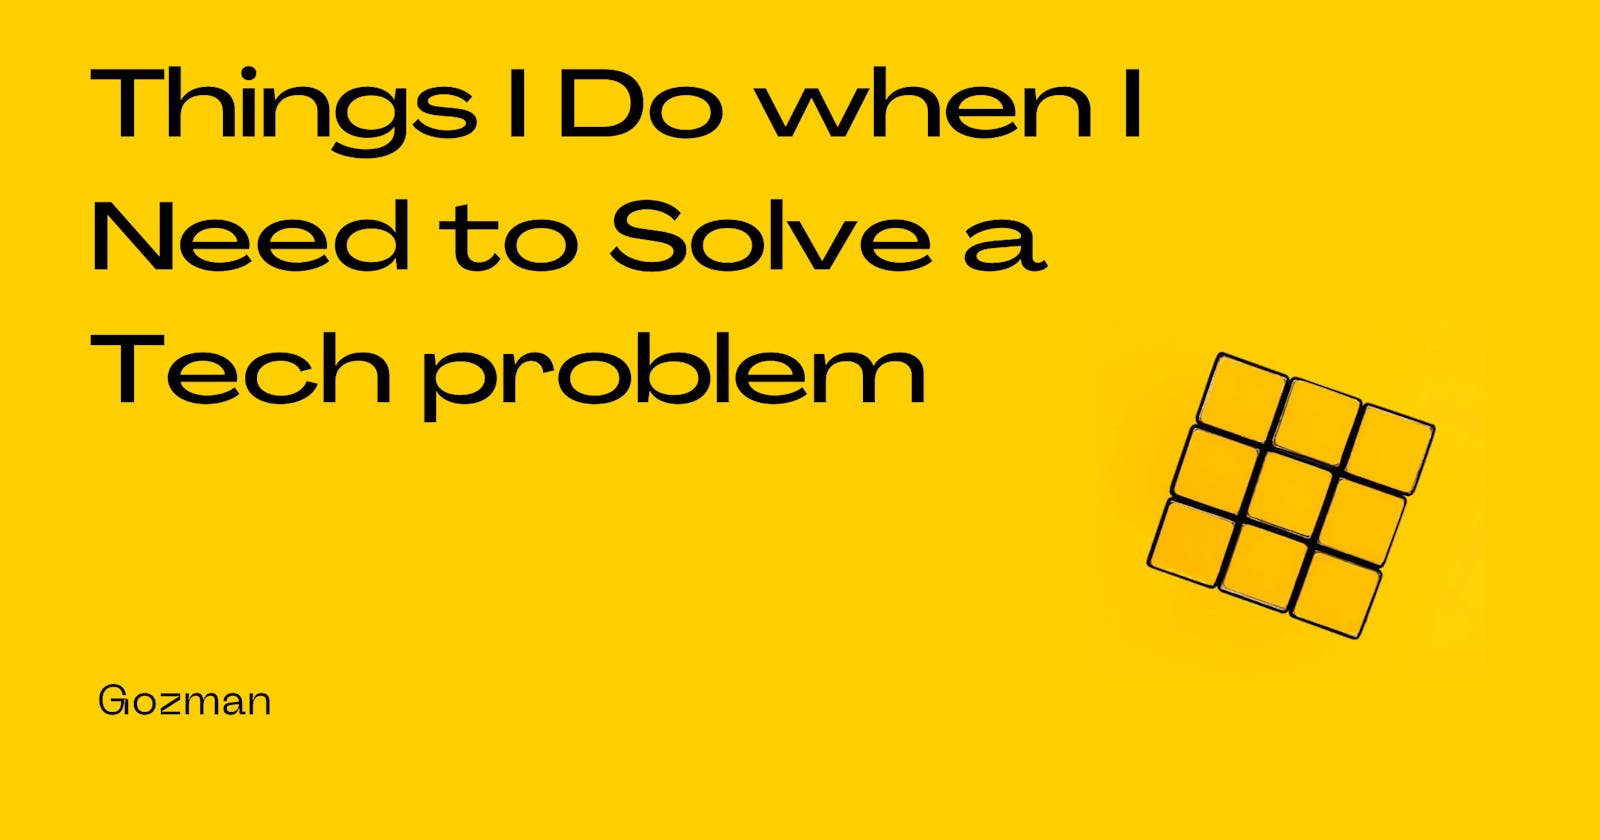 Things I Do when I Need to Solve a Tech problem